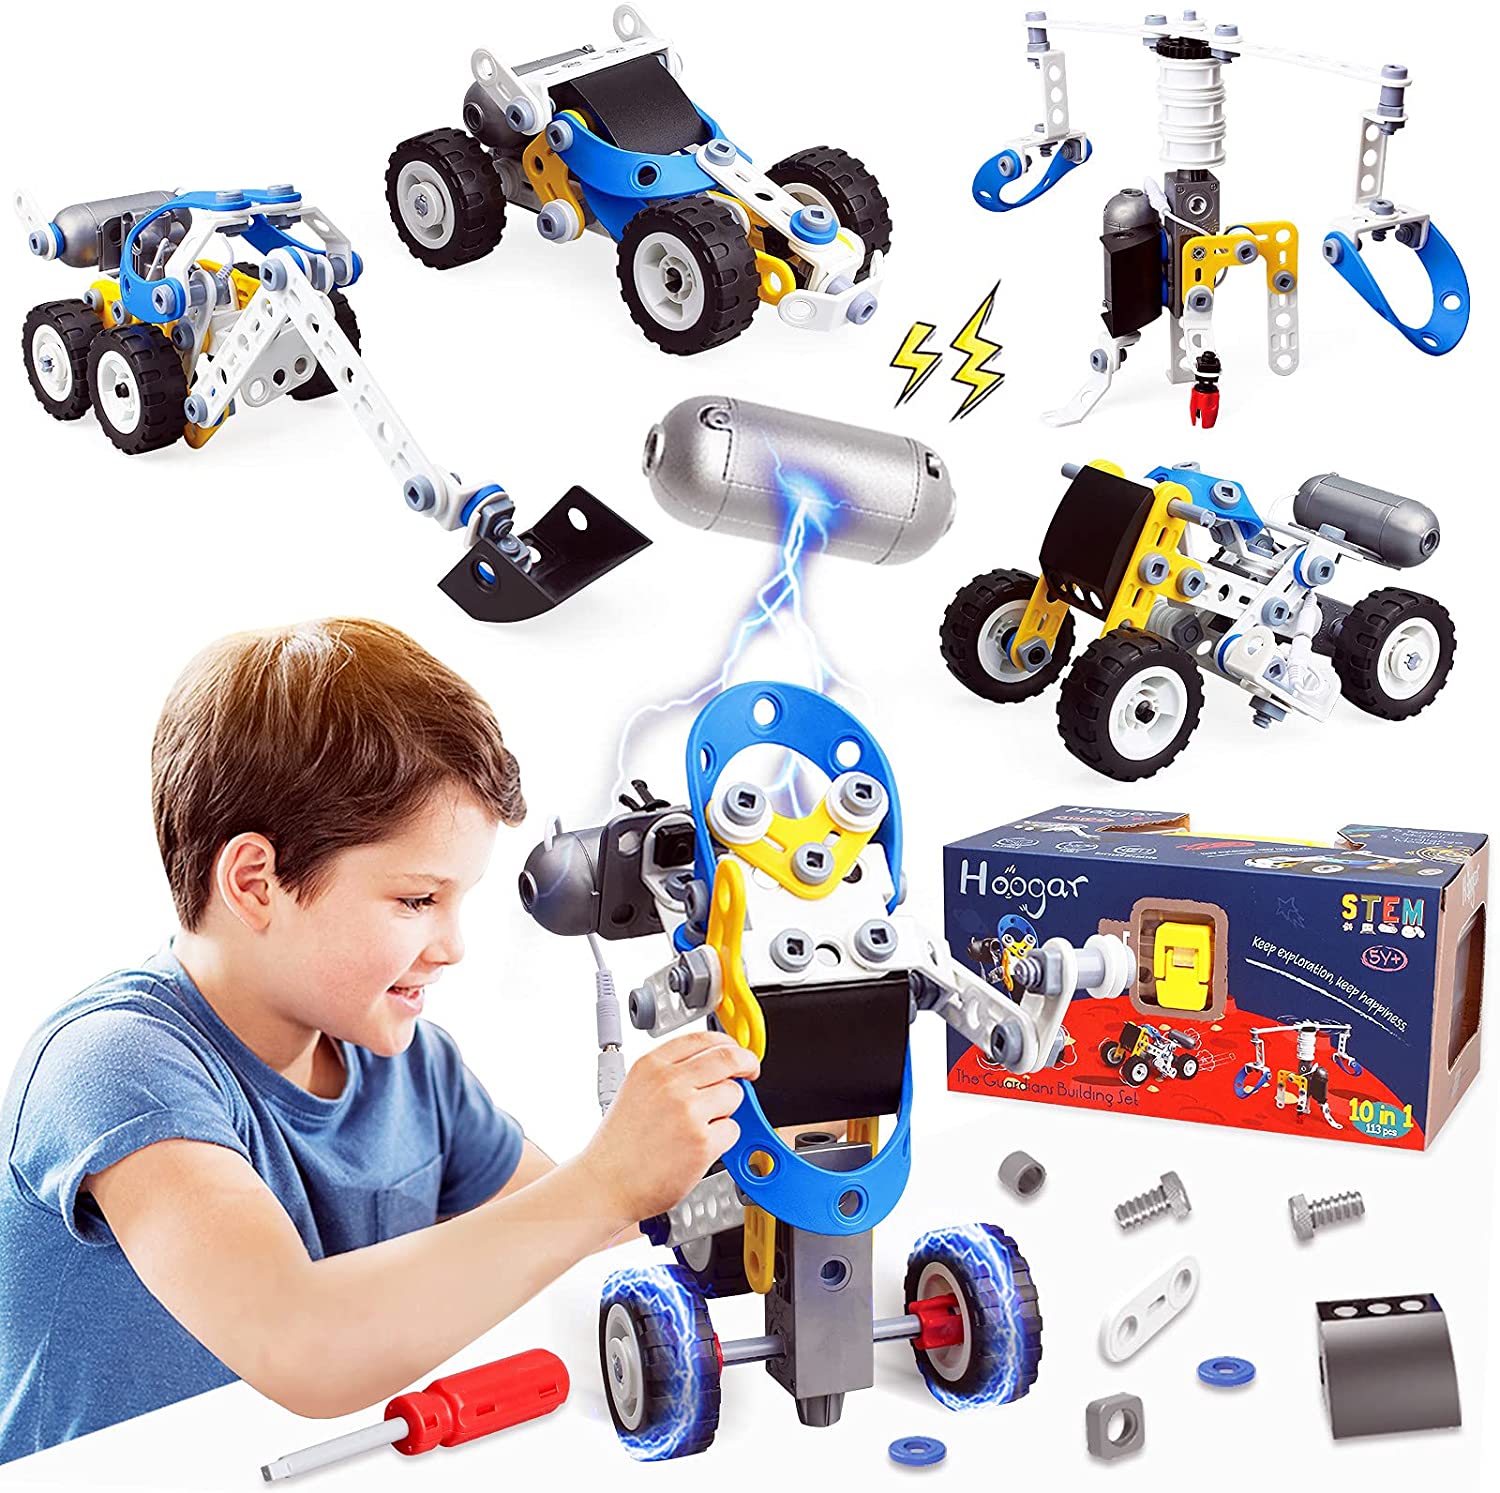 Hoogar Erector Set for Kids Educational Engineering Electric Power Construction Toys for Kids Year Old Boys Girls STEM Building Toys for Age 5 6 7 8 